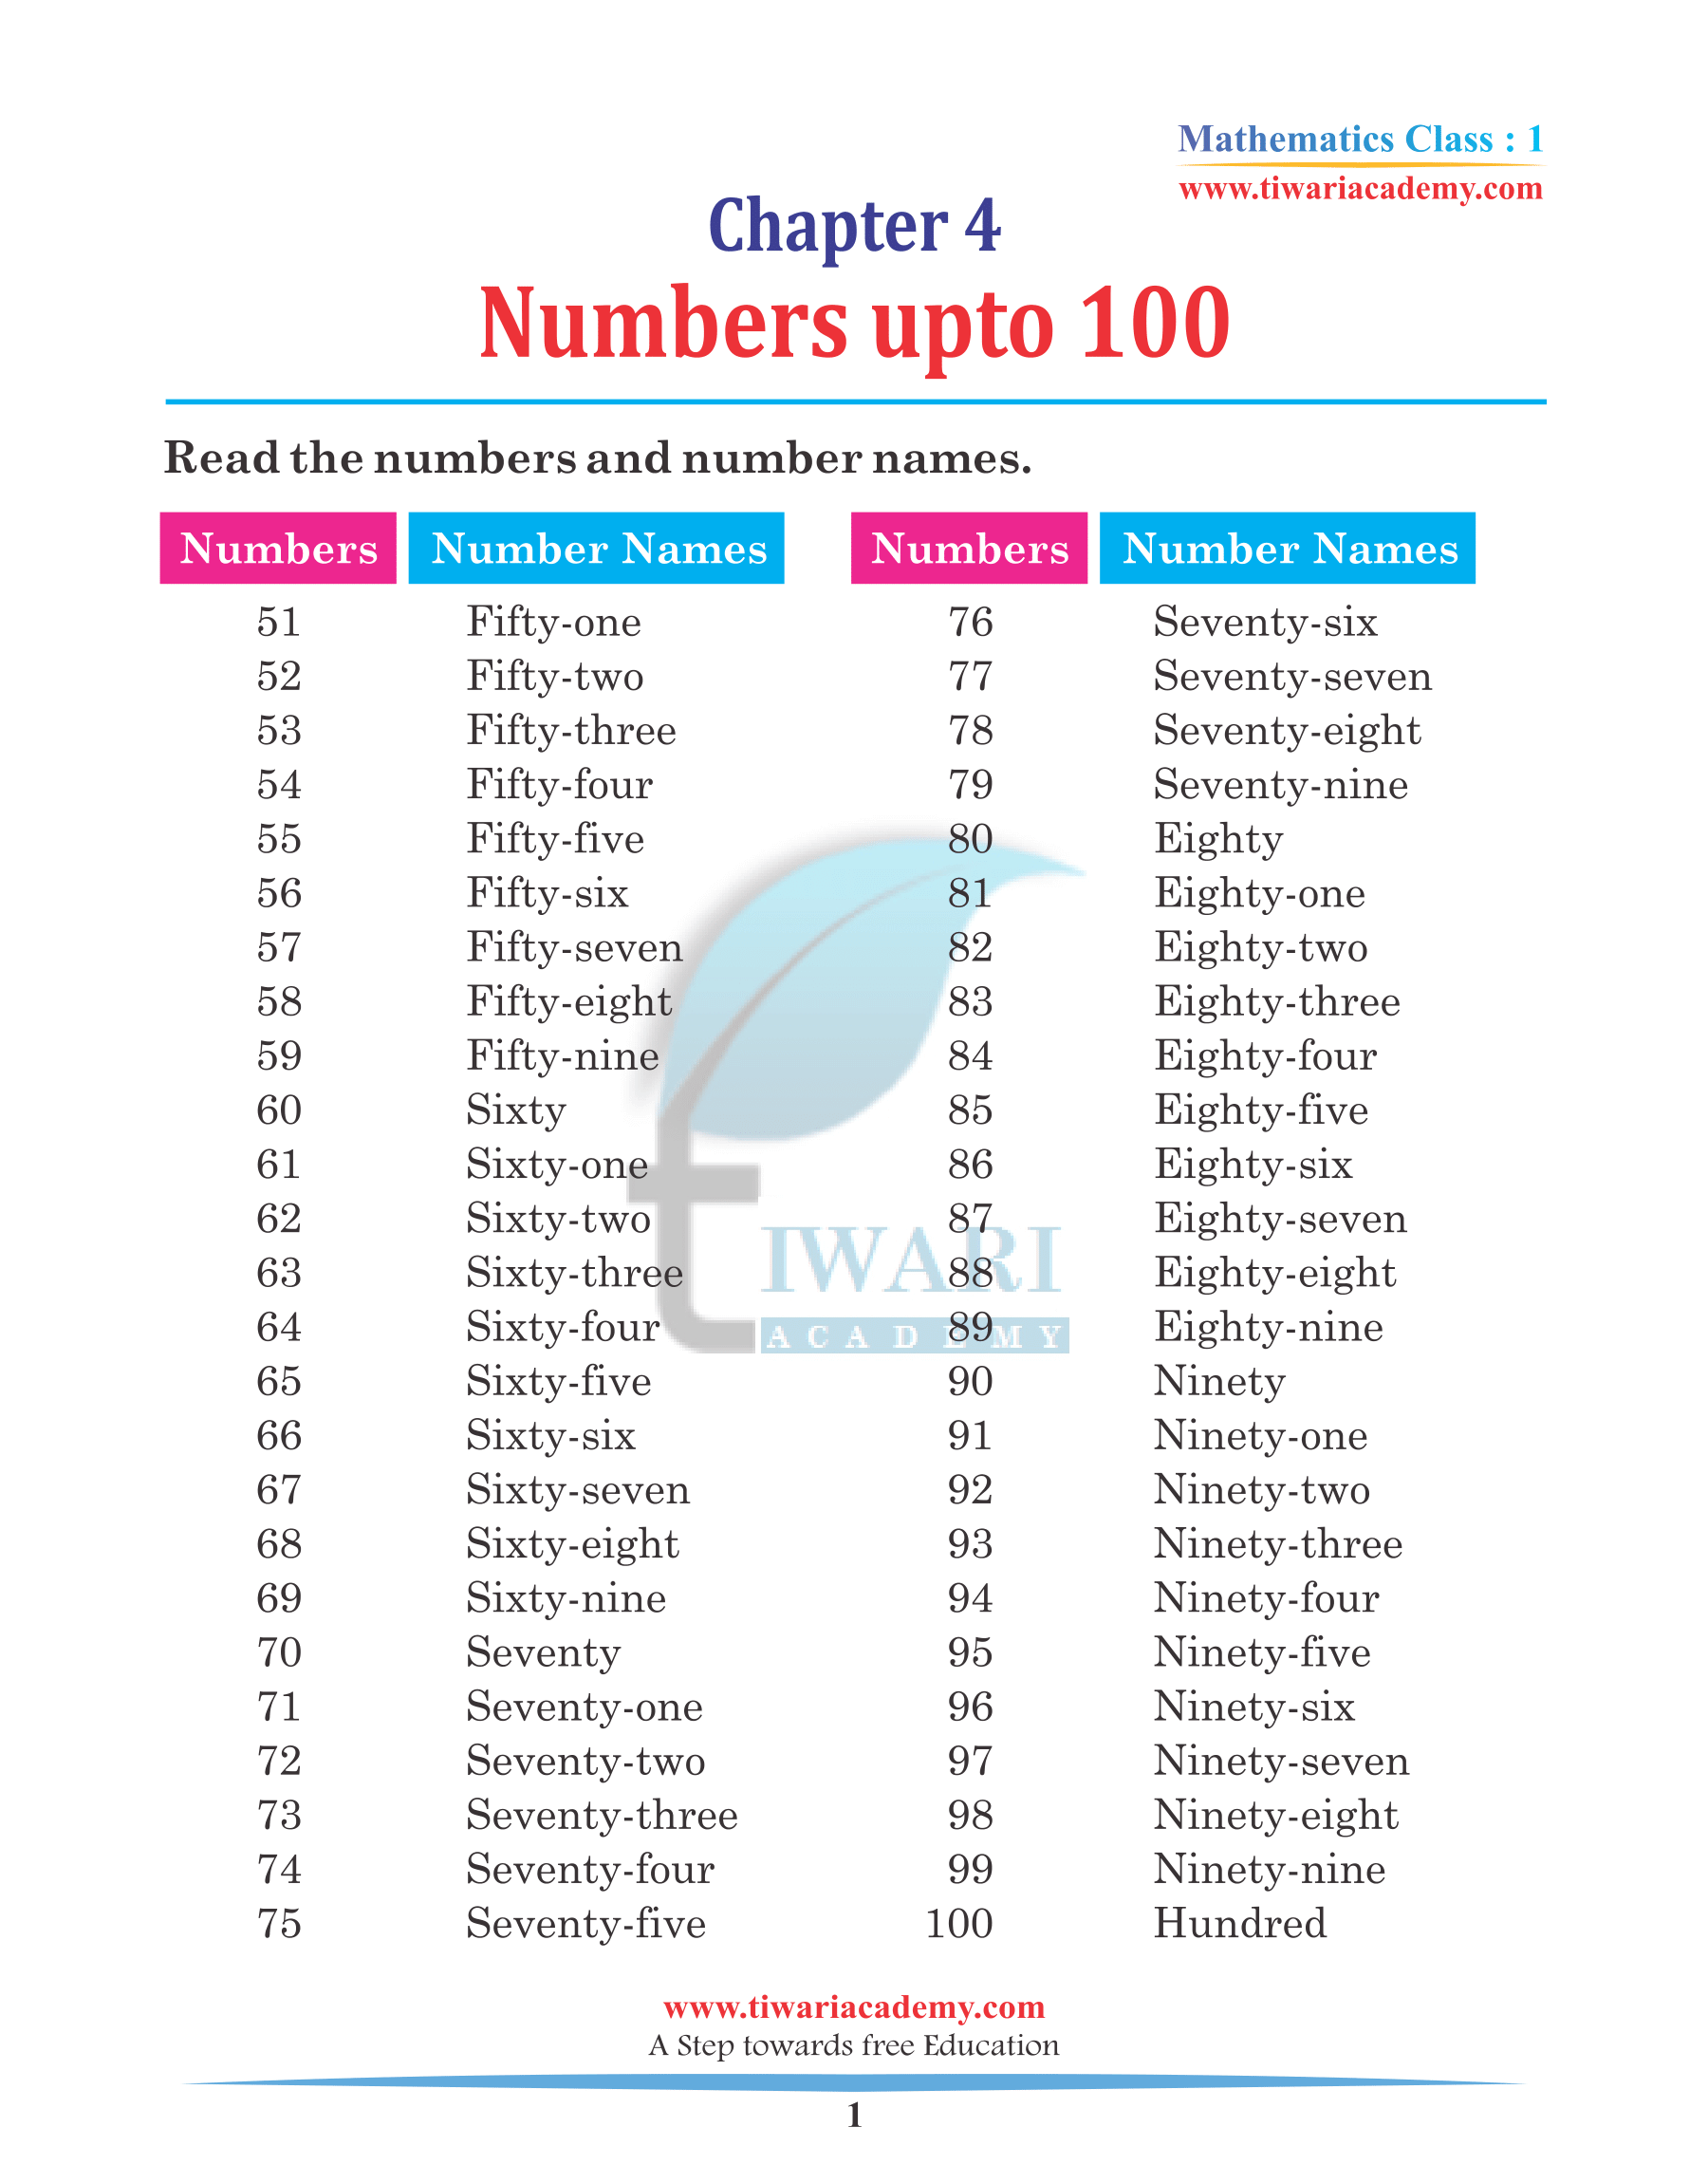 Class 1 Maths Chapter 4 Practice Number upto 100